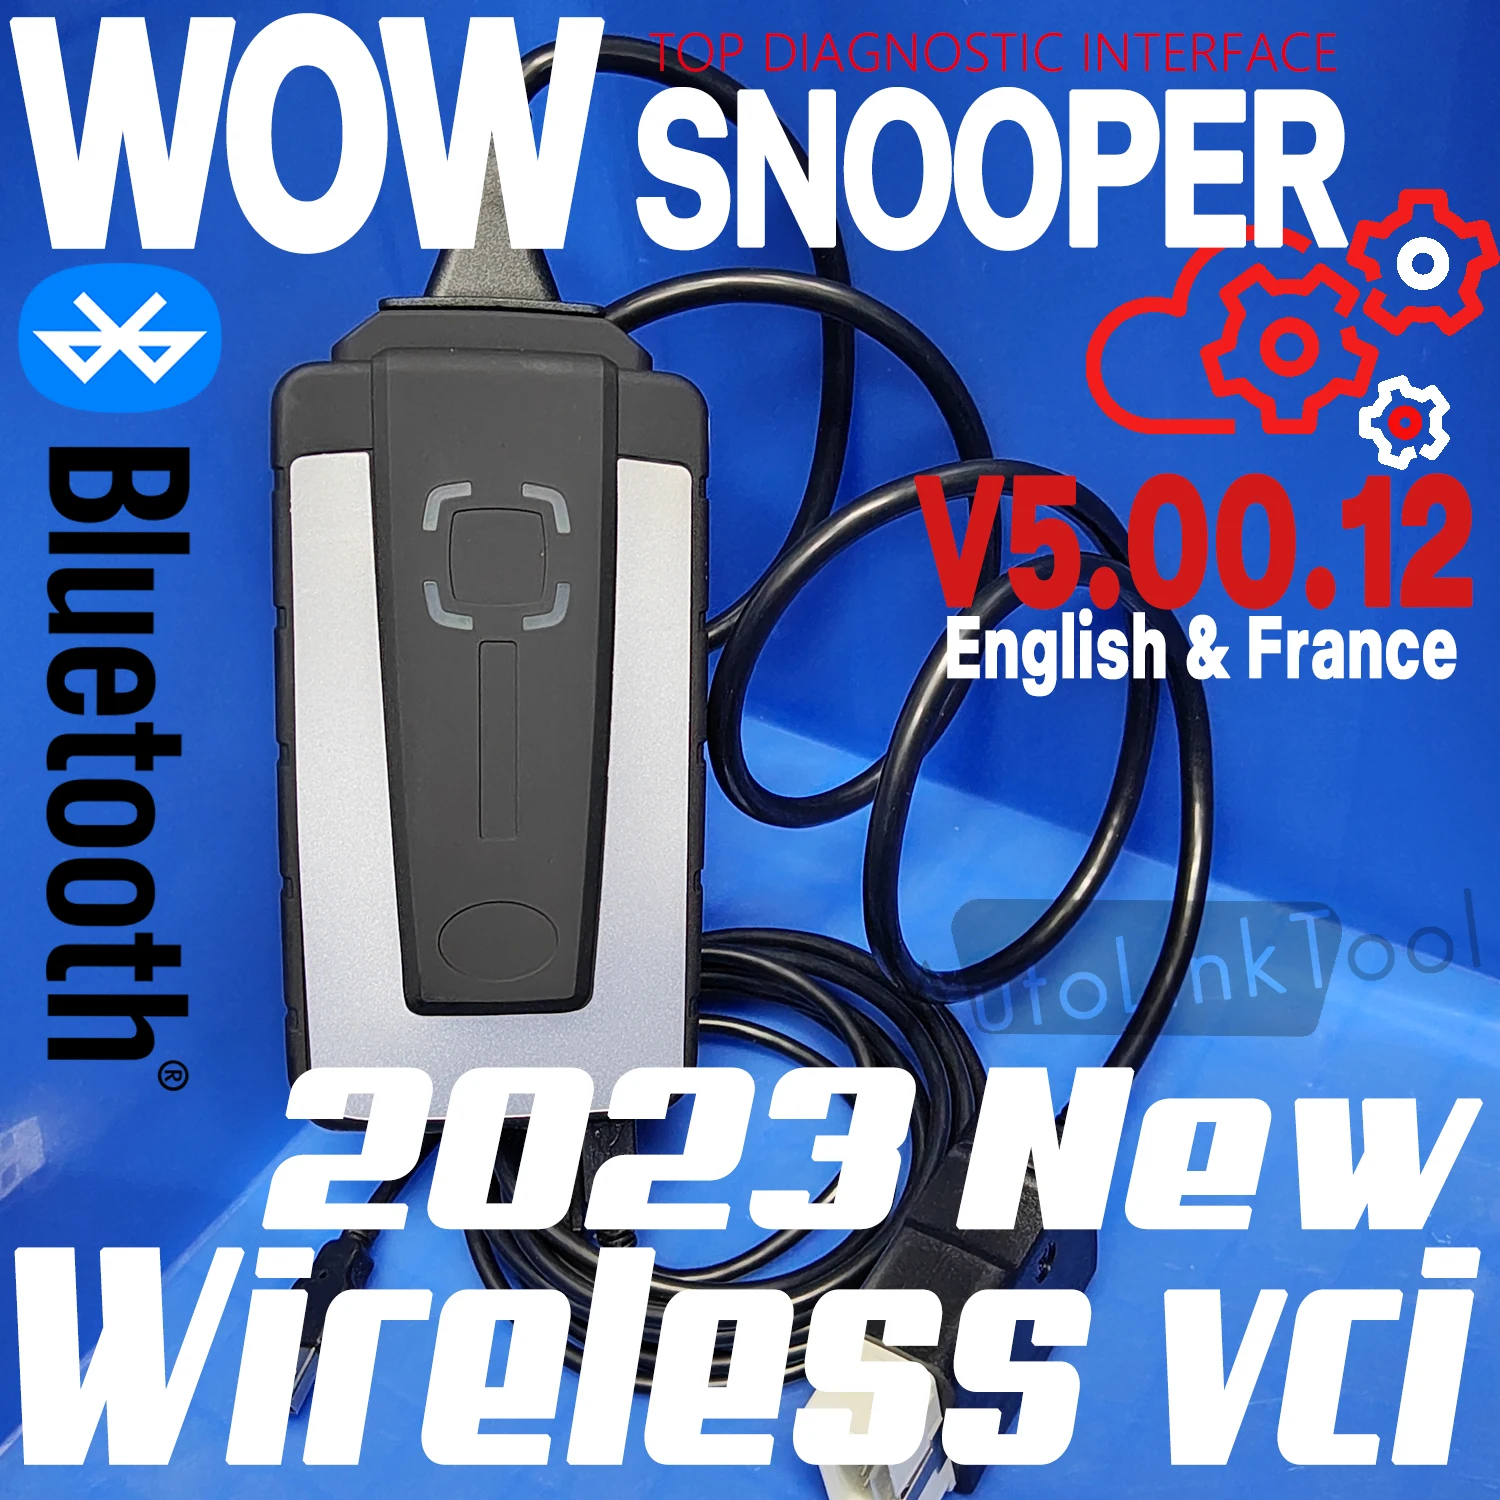 A+++ Wow Snooper Full Chip Bluetooth VCI Diagnostic Tool V5.00.12 Update... - $185.76